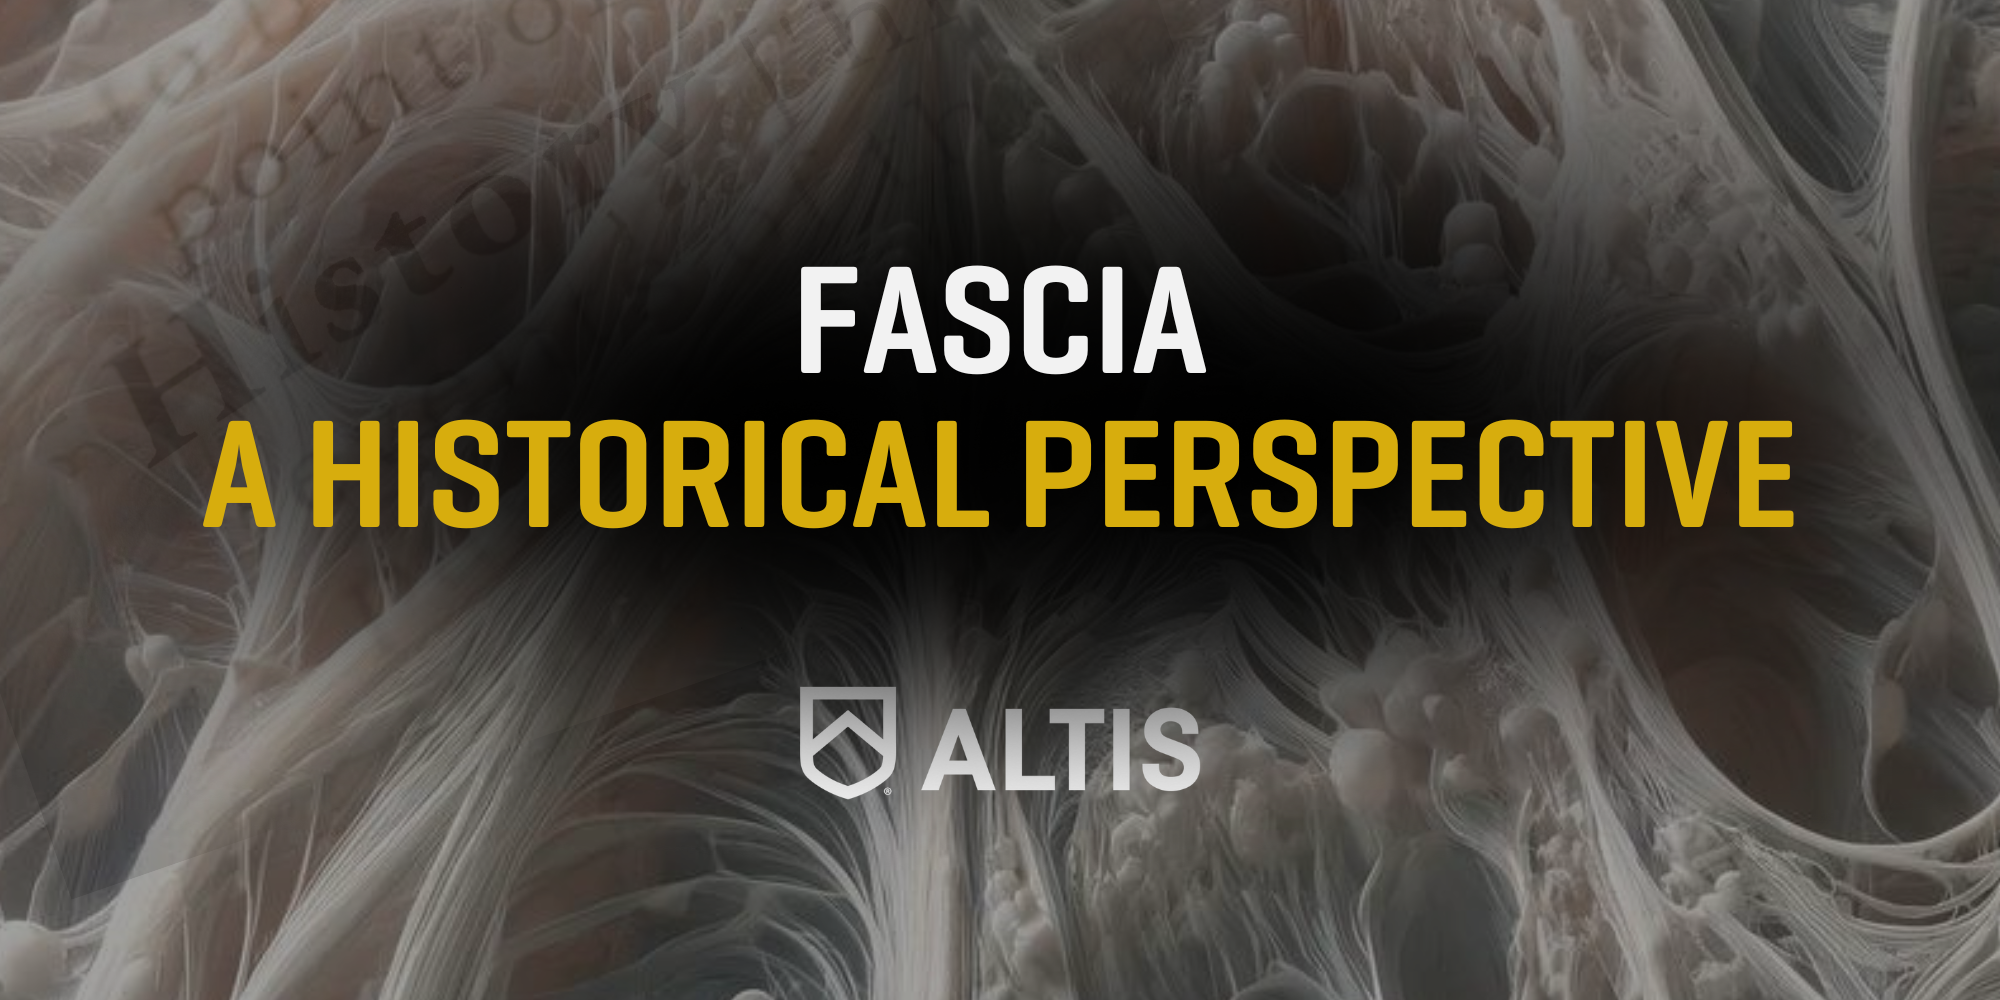 Fascia: A Historical Perspective